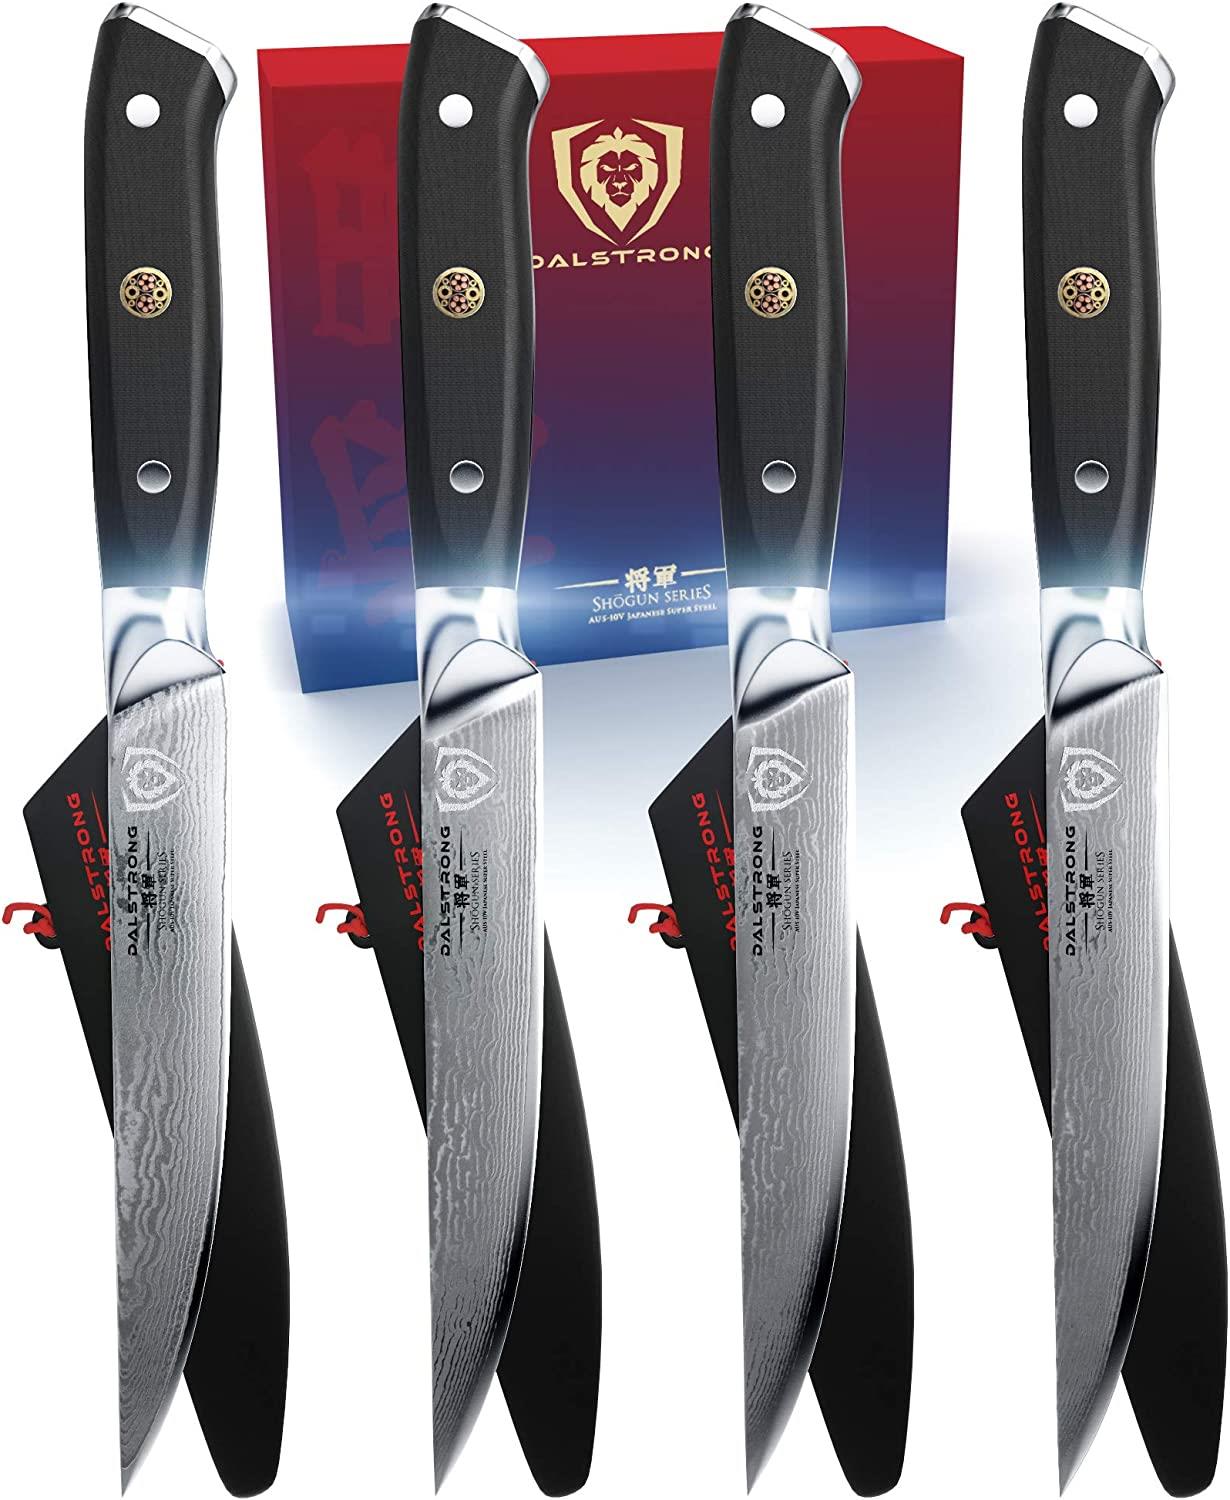 The Shogun Series 14 Extra-Long Slicing Knife Bundled with The